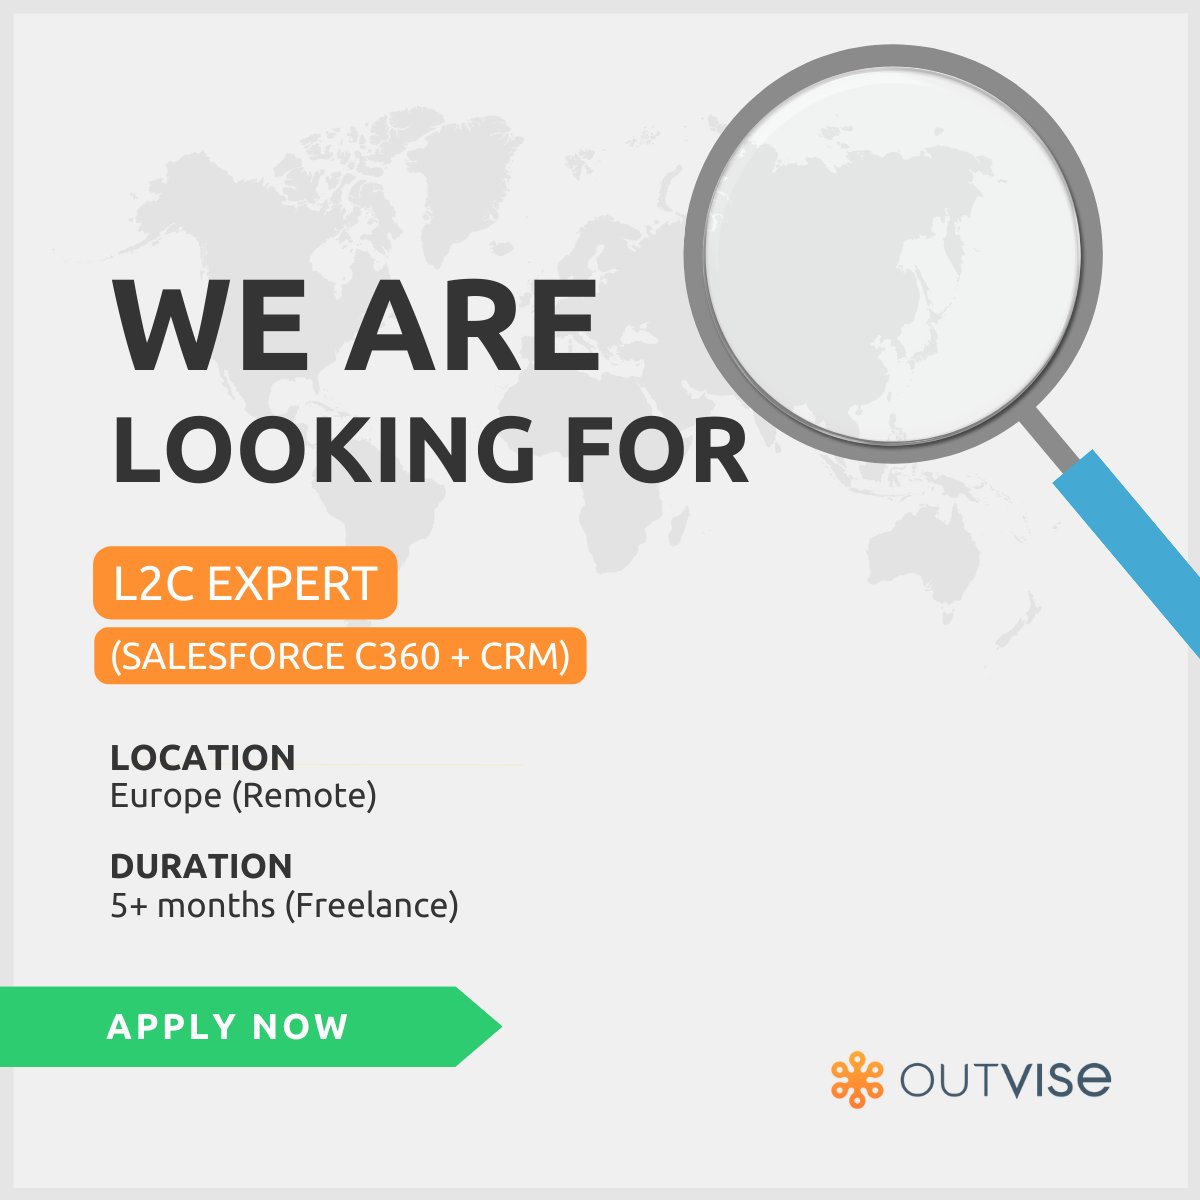 Our client is seeking an L2C Expert (Salesforce C360 + CRM). 🔎

Apply here 👉 outvise.com/sl/f_k2ZCjKpf

#OutviseProjects #Freelance #Hiringnow #Europe